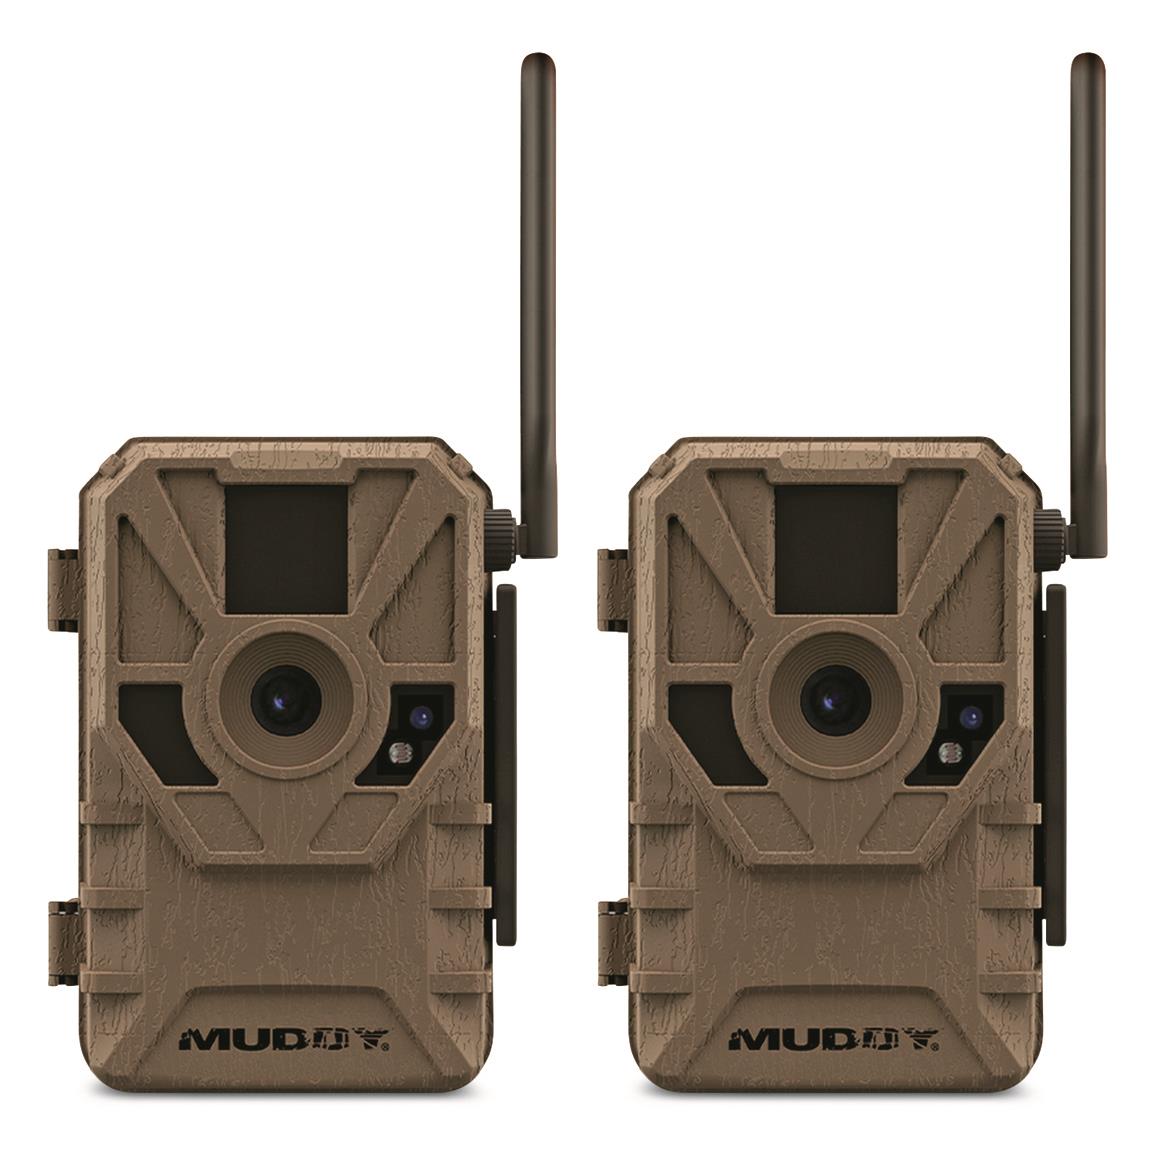 Muddy Manifest 2.0 Cellular Trail/Game Camera, 16MP, 2 Pack, At&t